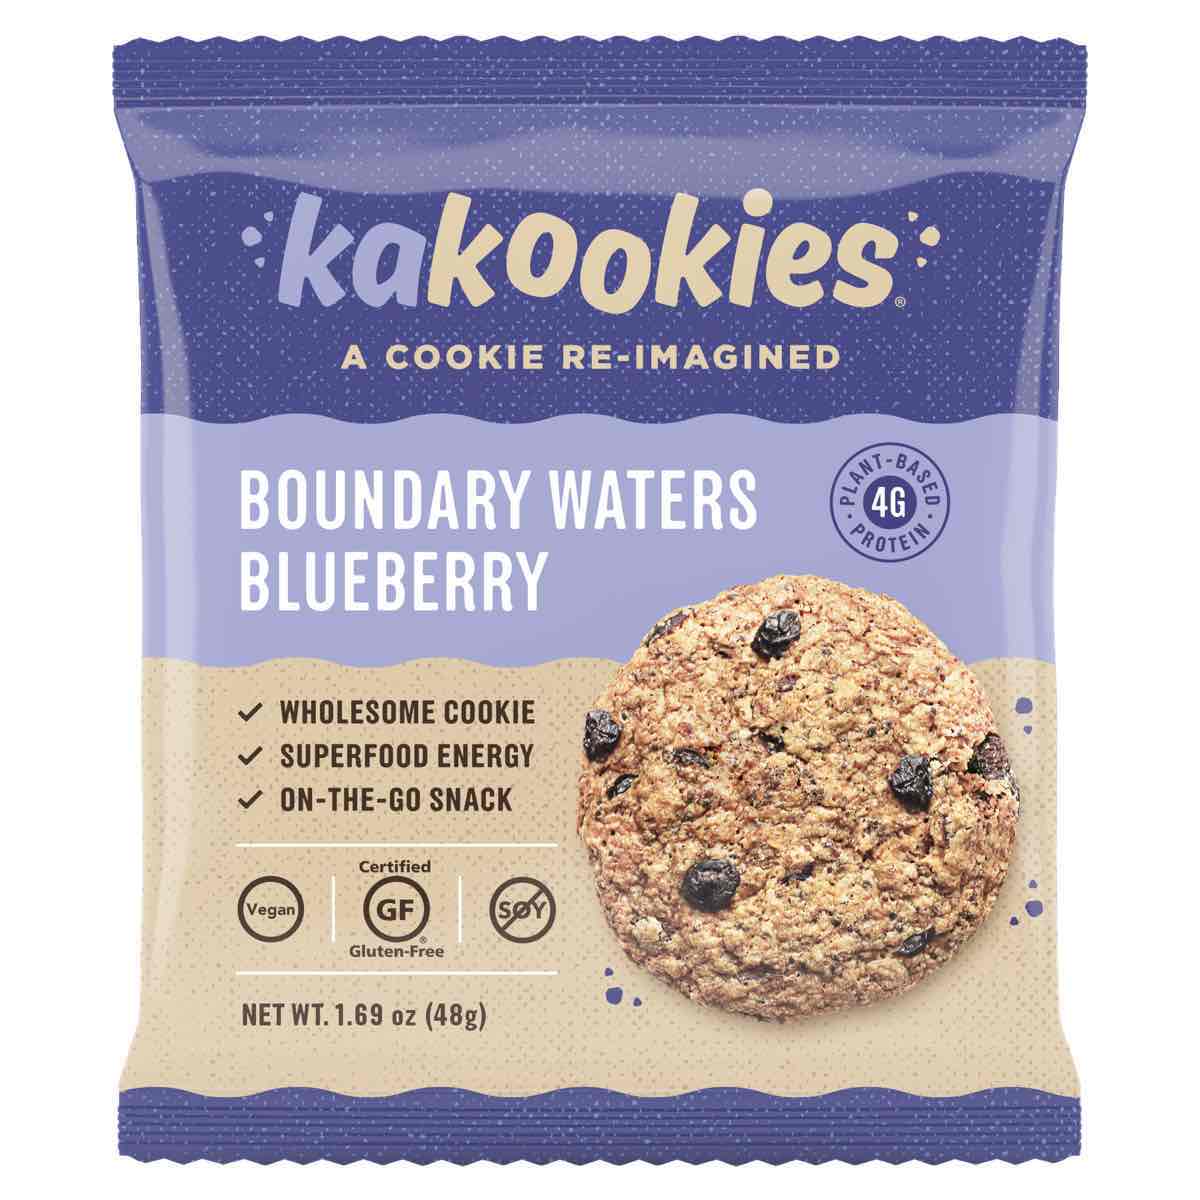 Boundary Waters Blueberry energy cookies